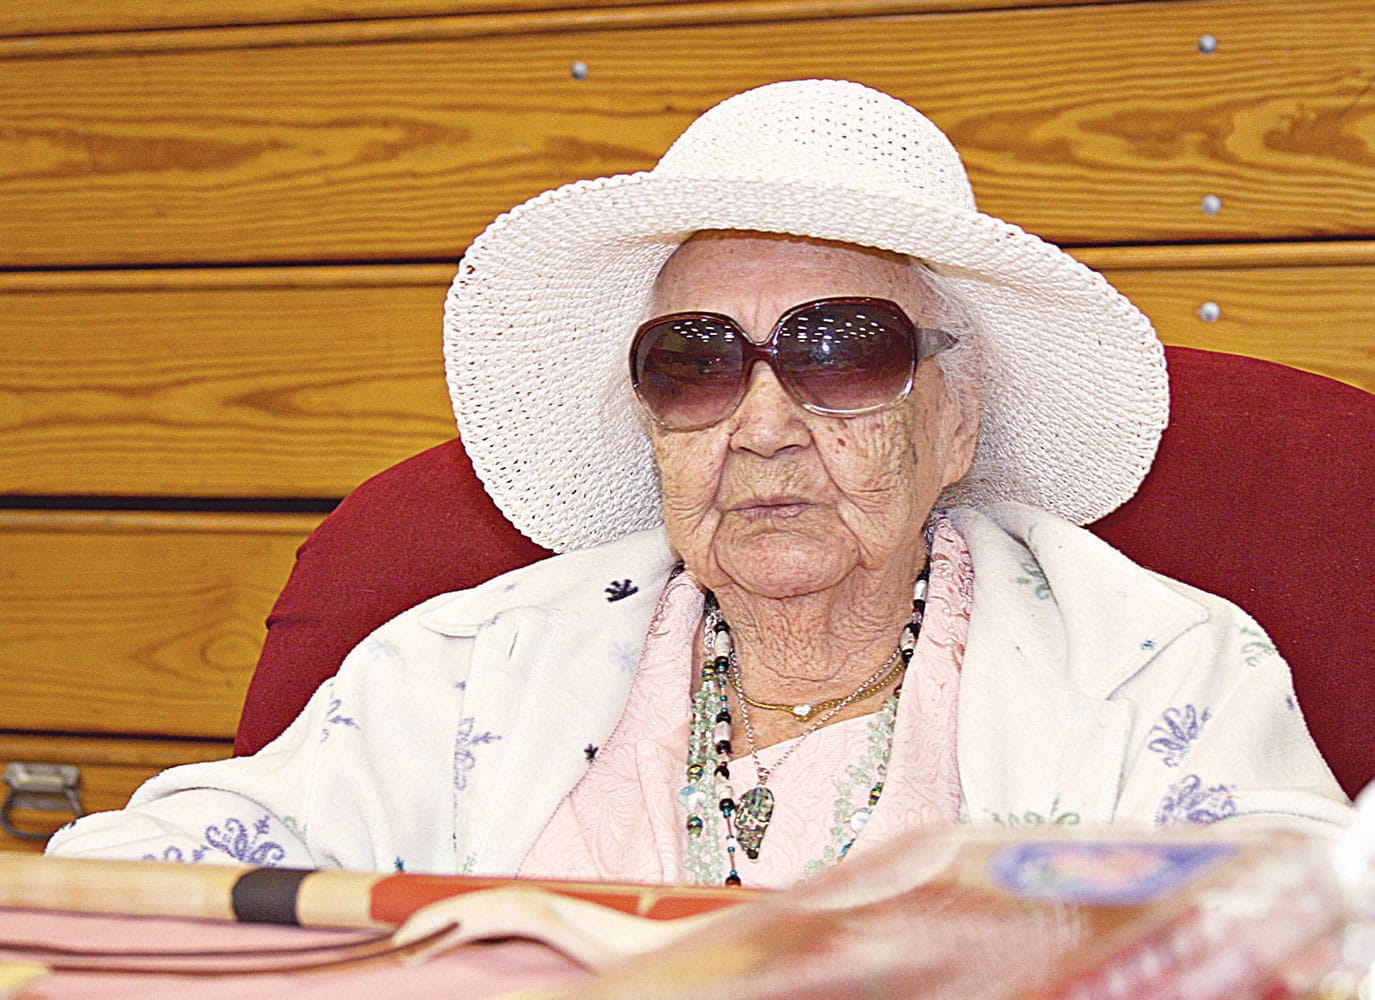 Peninsula Daily News files
Hazel Sampson, a member of the Lower Elwha Klallam tribe, on her 101st birthday in 2011 at the tribal center near Port Angeles. Sampson, the last to have spoken the Klallam language from birth, died on Feb 4. She was 103.